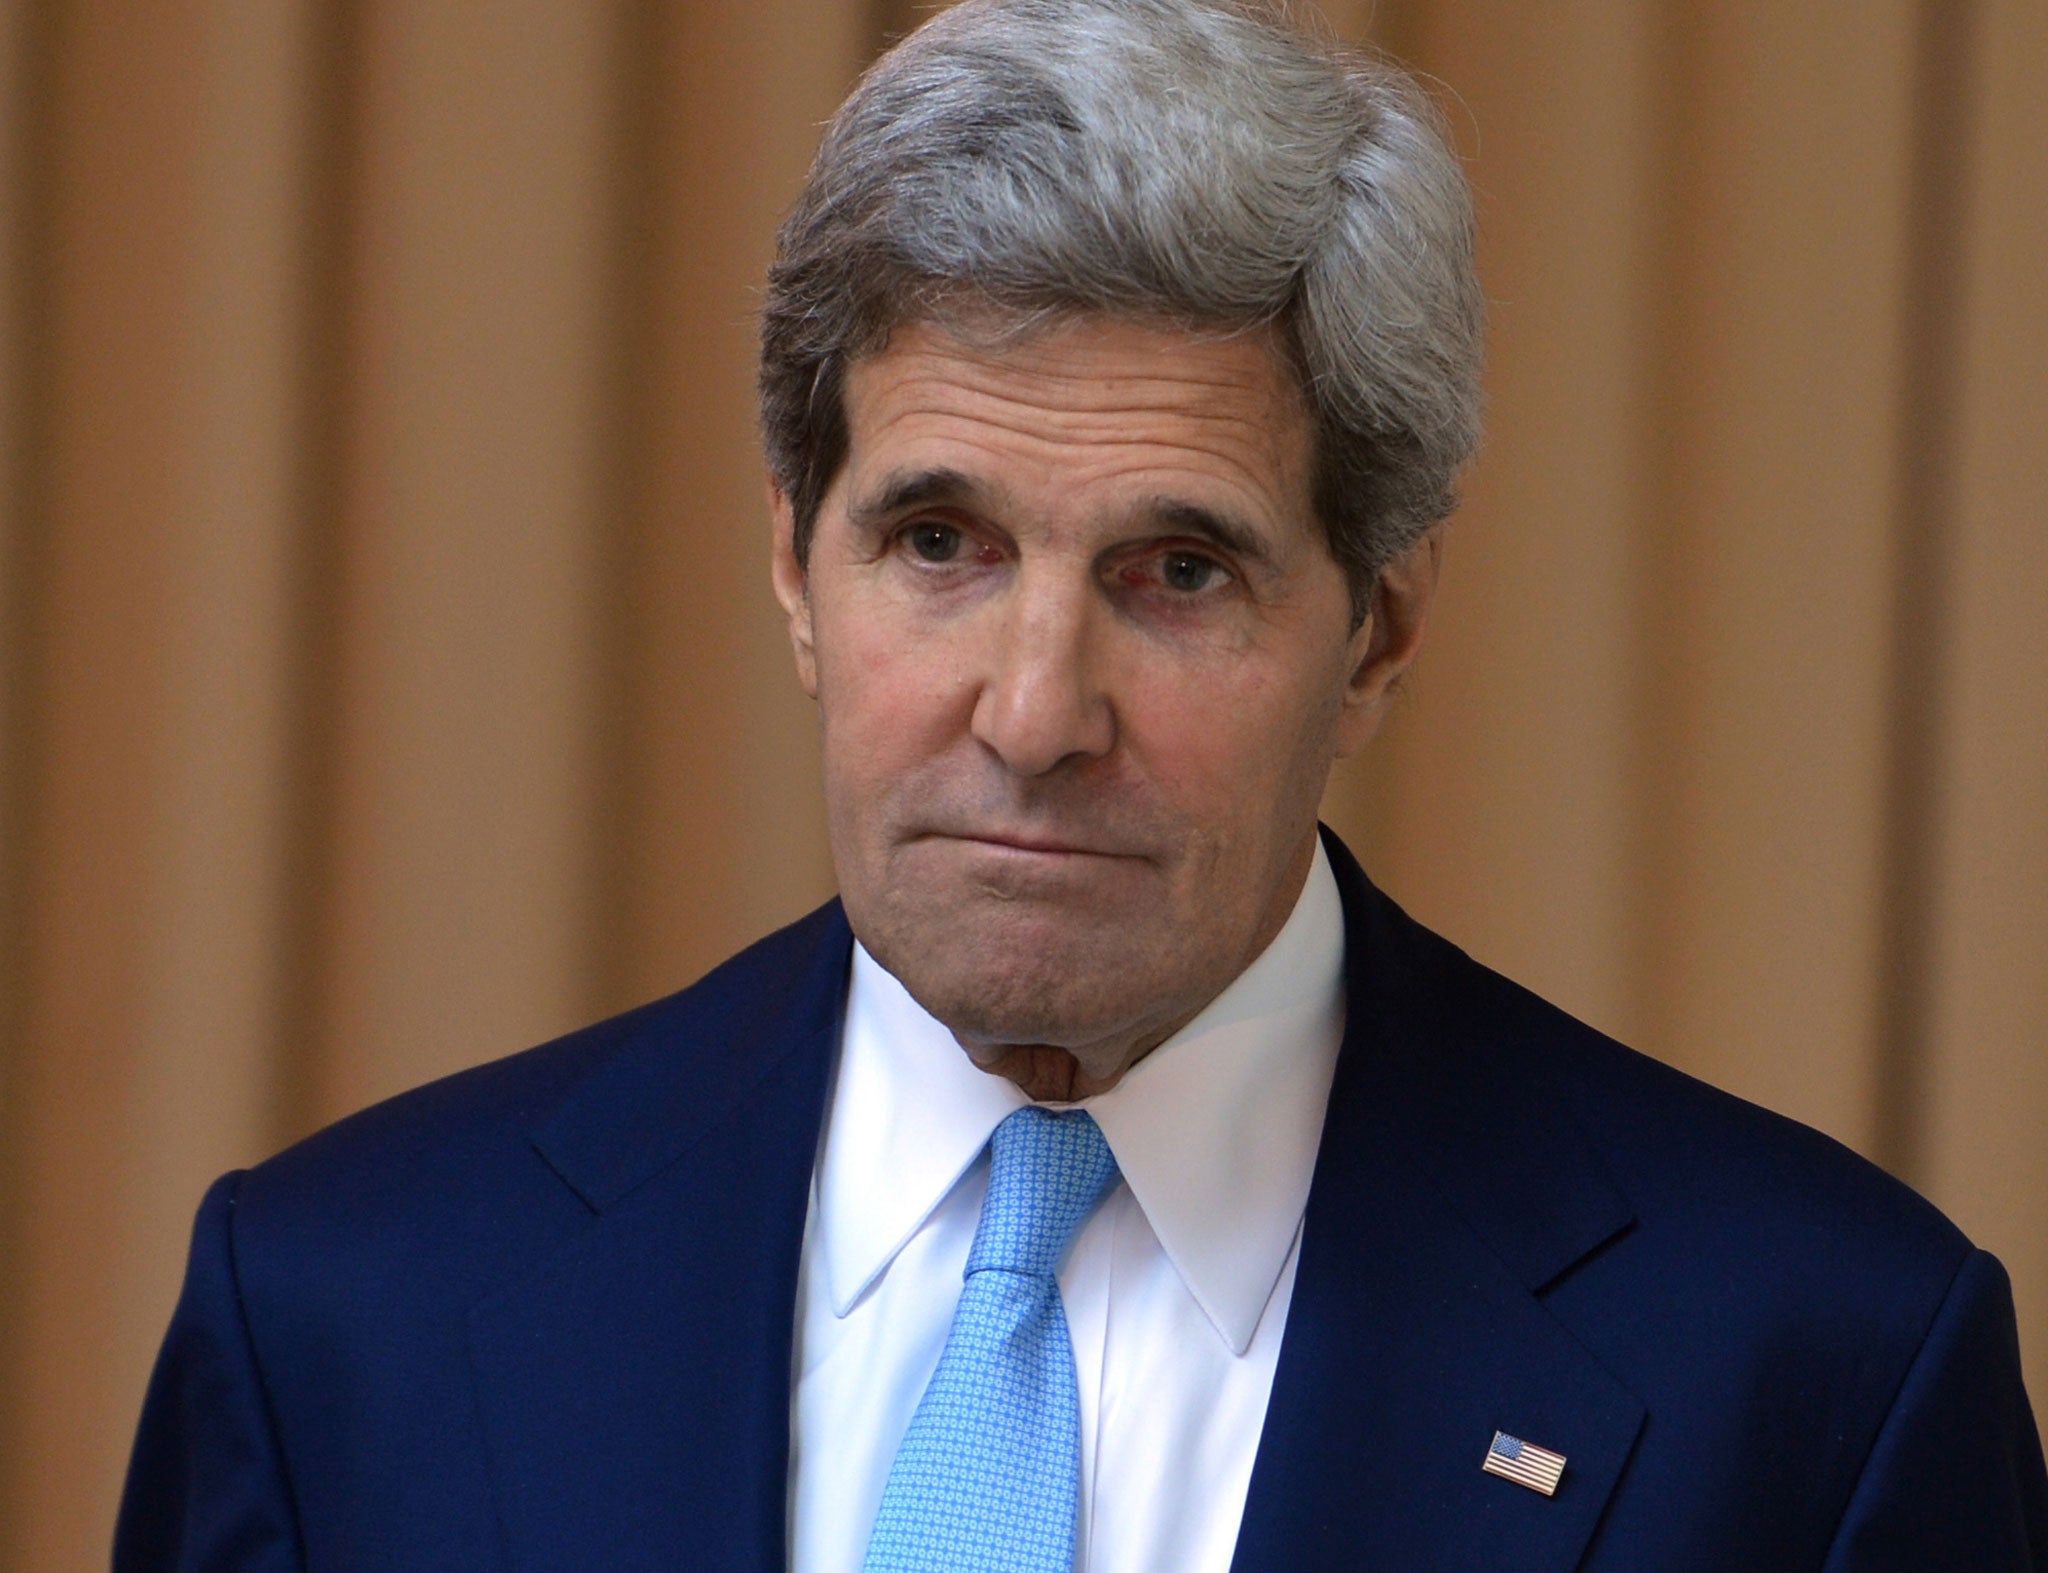 John Kerry was among those meeting to discuss US security threats